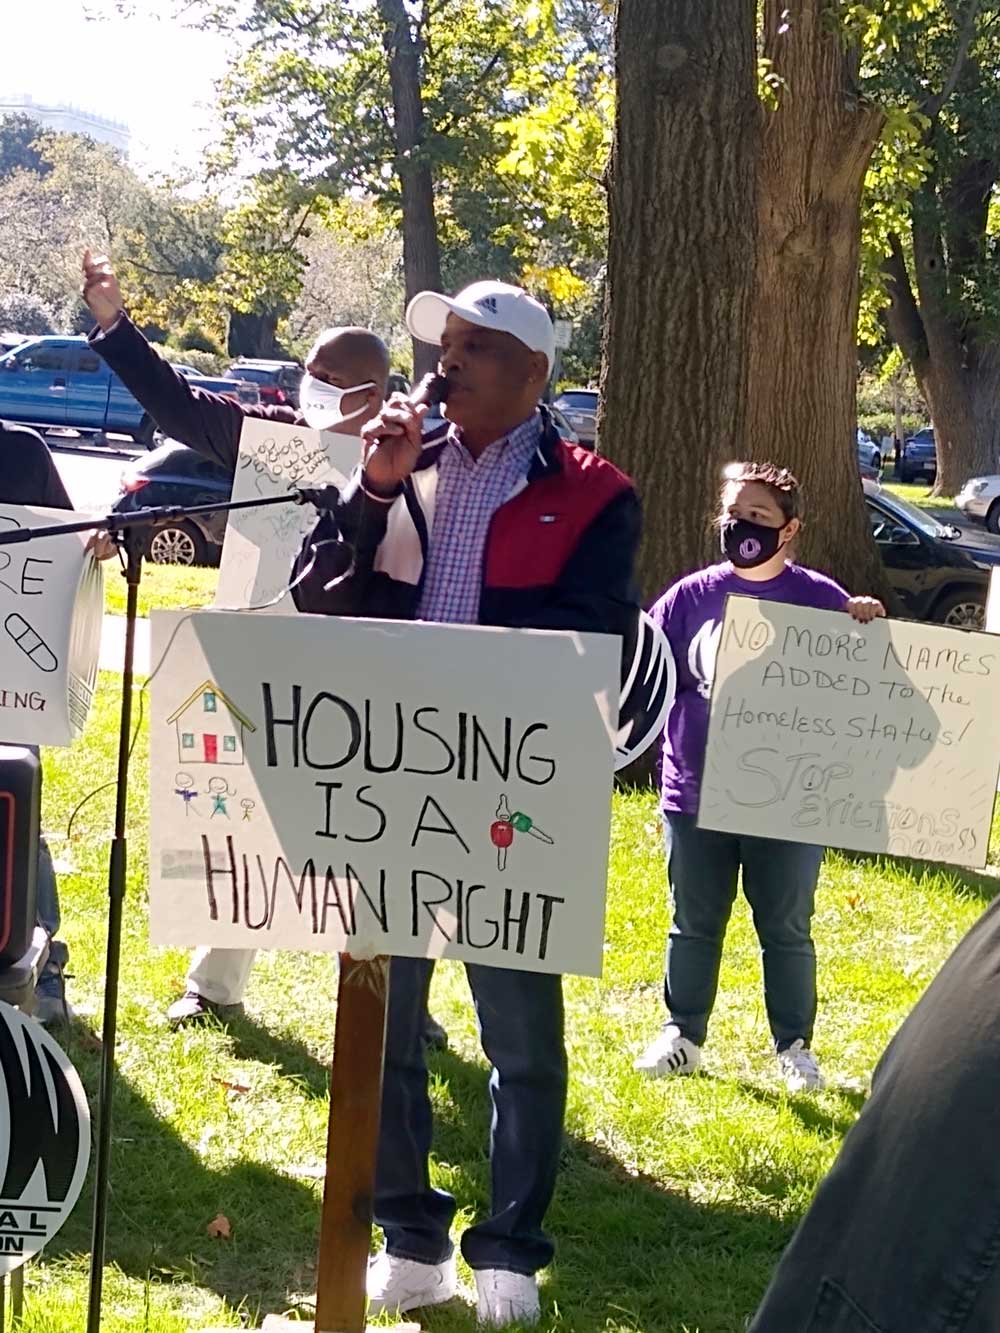 A man stands at a podium that bears the sign "housing is a human right"